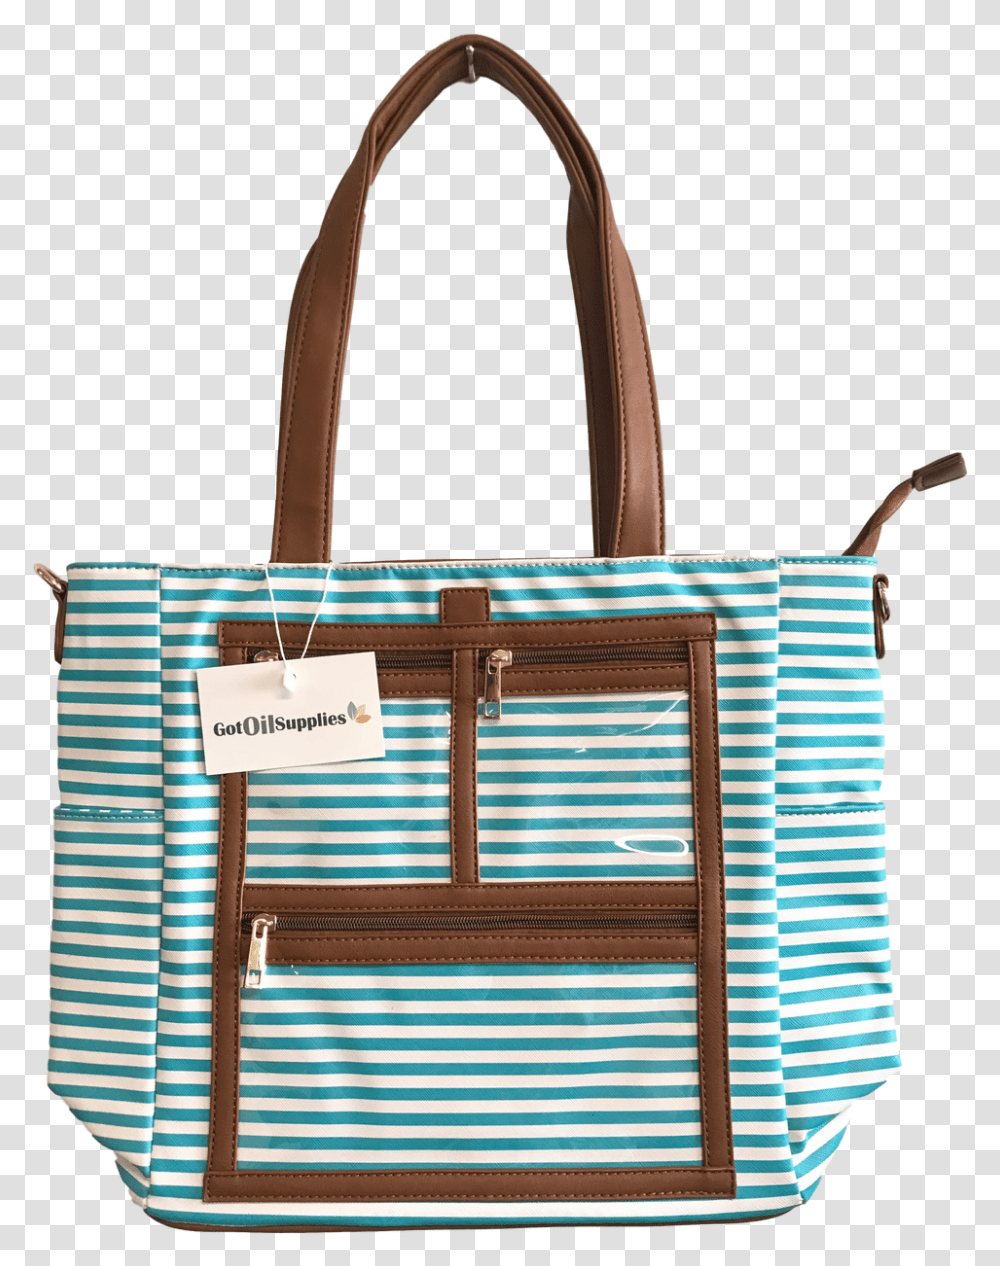 Striped Tote Bag With Clear Pocket, Handbag, Accessories, Accessory, Purse Transparent Png